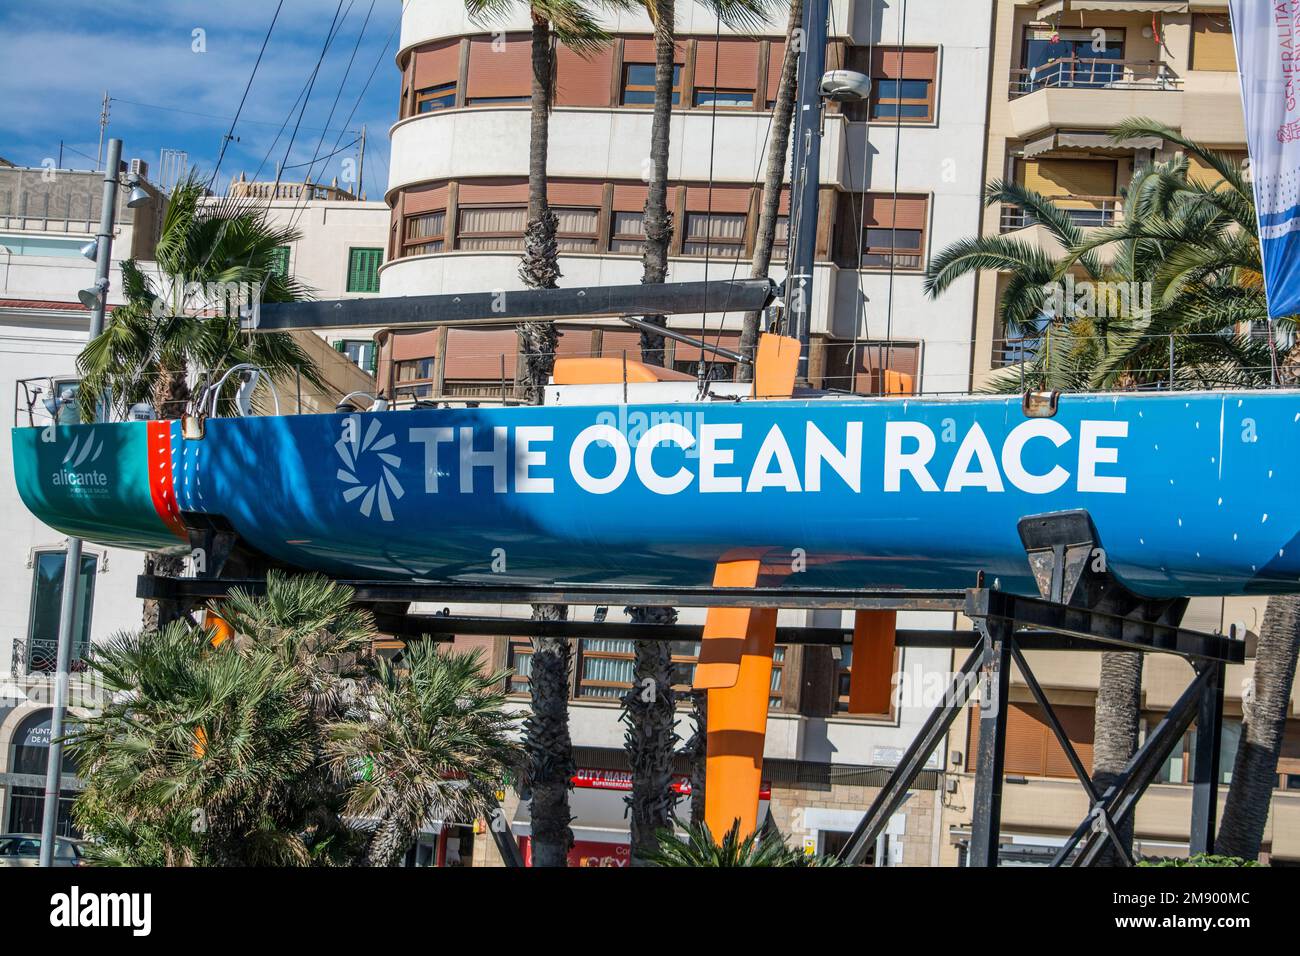 Replica of an Ocean yacht to promote the Ocean Race in the Spanish city of Alicante Stock Photo